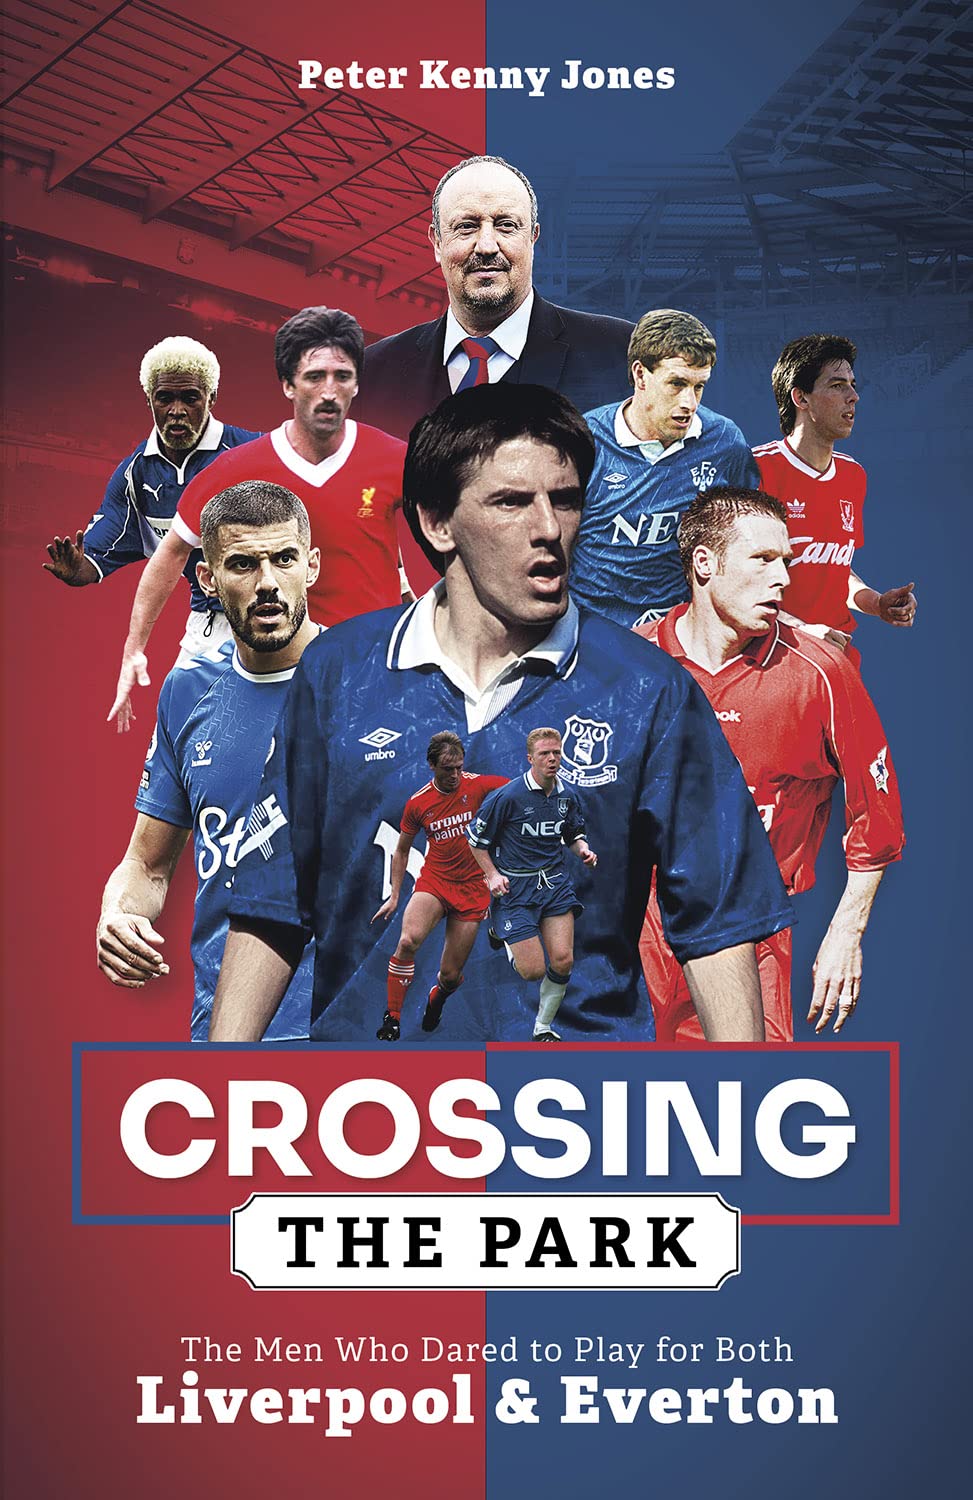 Crossing_the_park front cover book